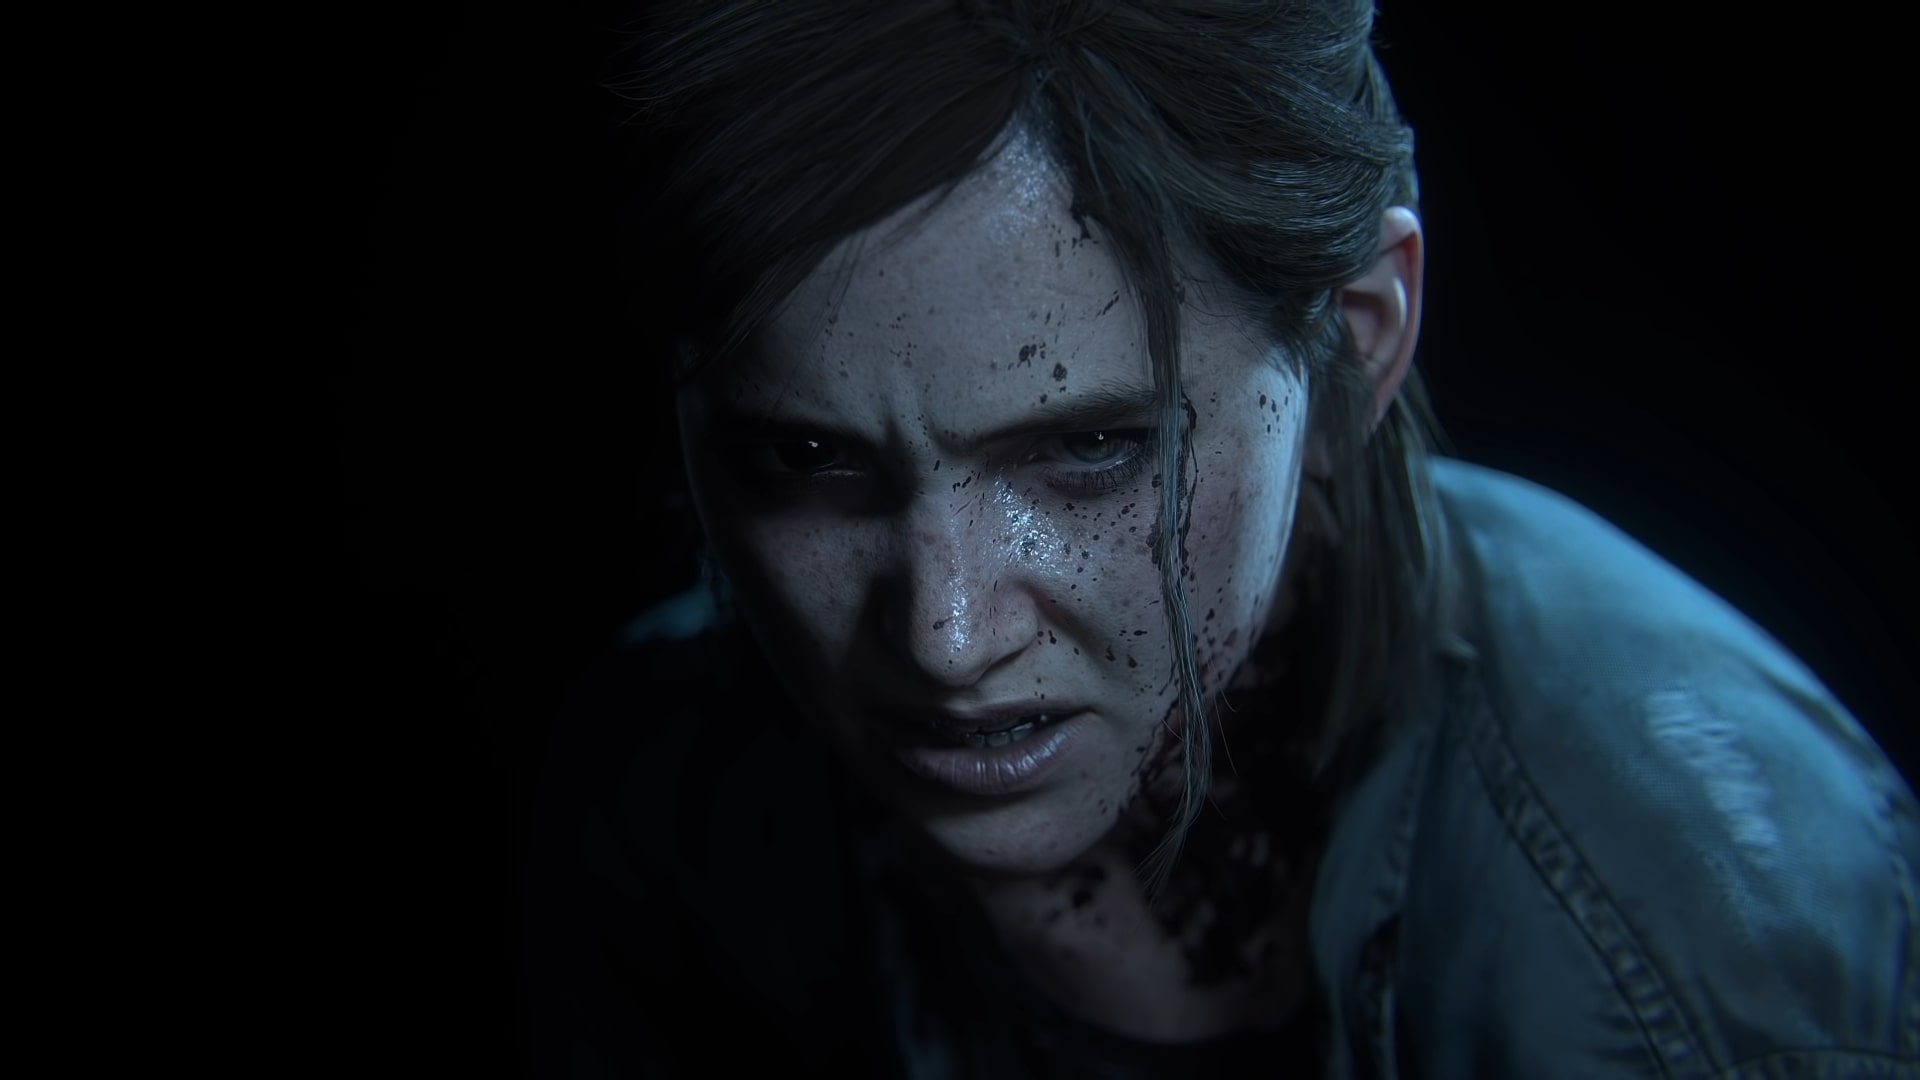 Wallpaper Of Video Game, The Last Of Us Part Ii, Ellie - Ellie Last Of Us 2 - HD Wallpaper 